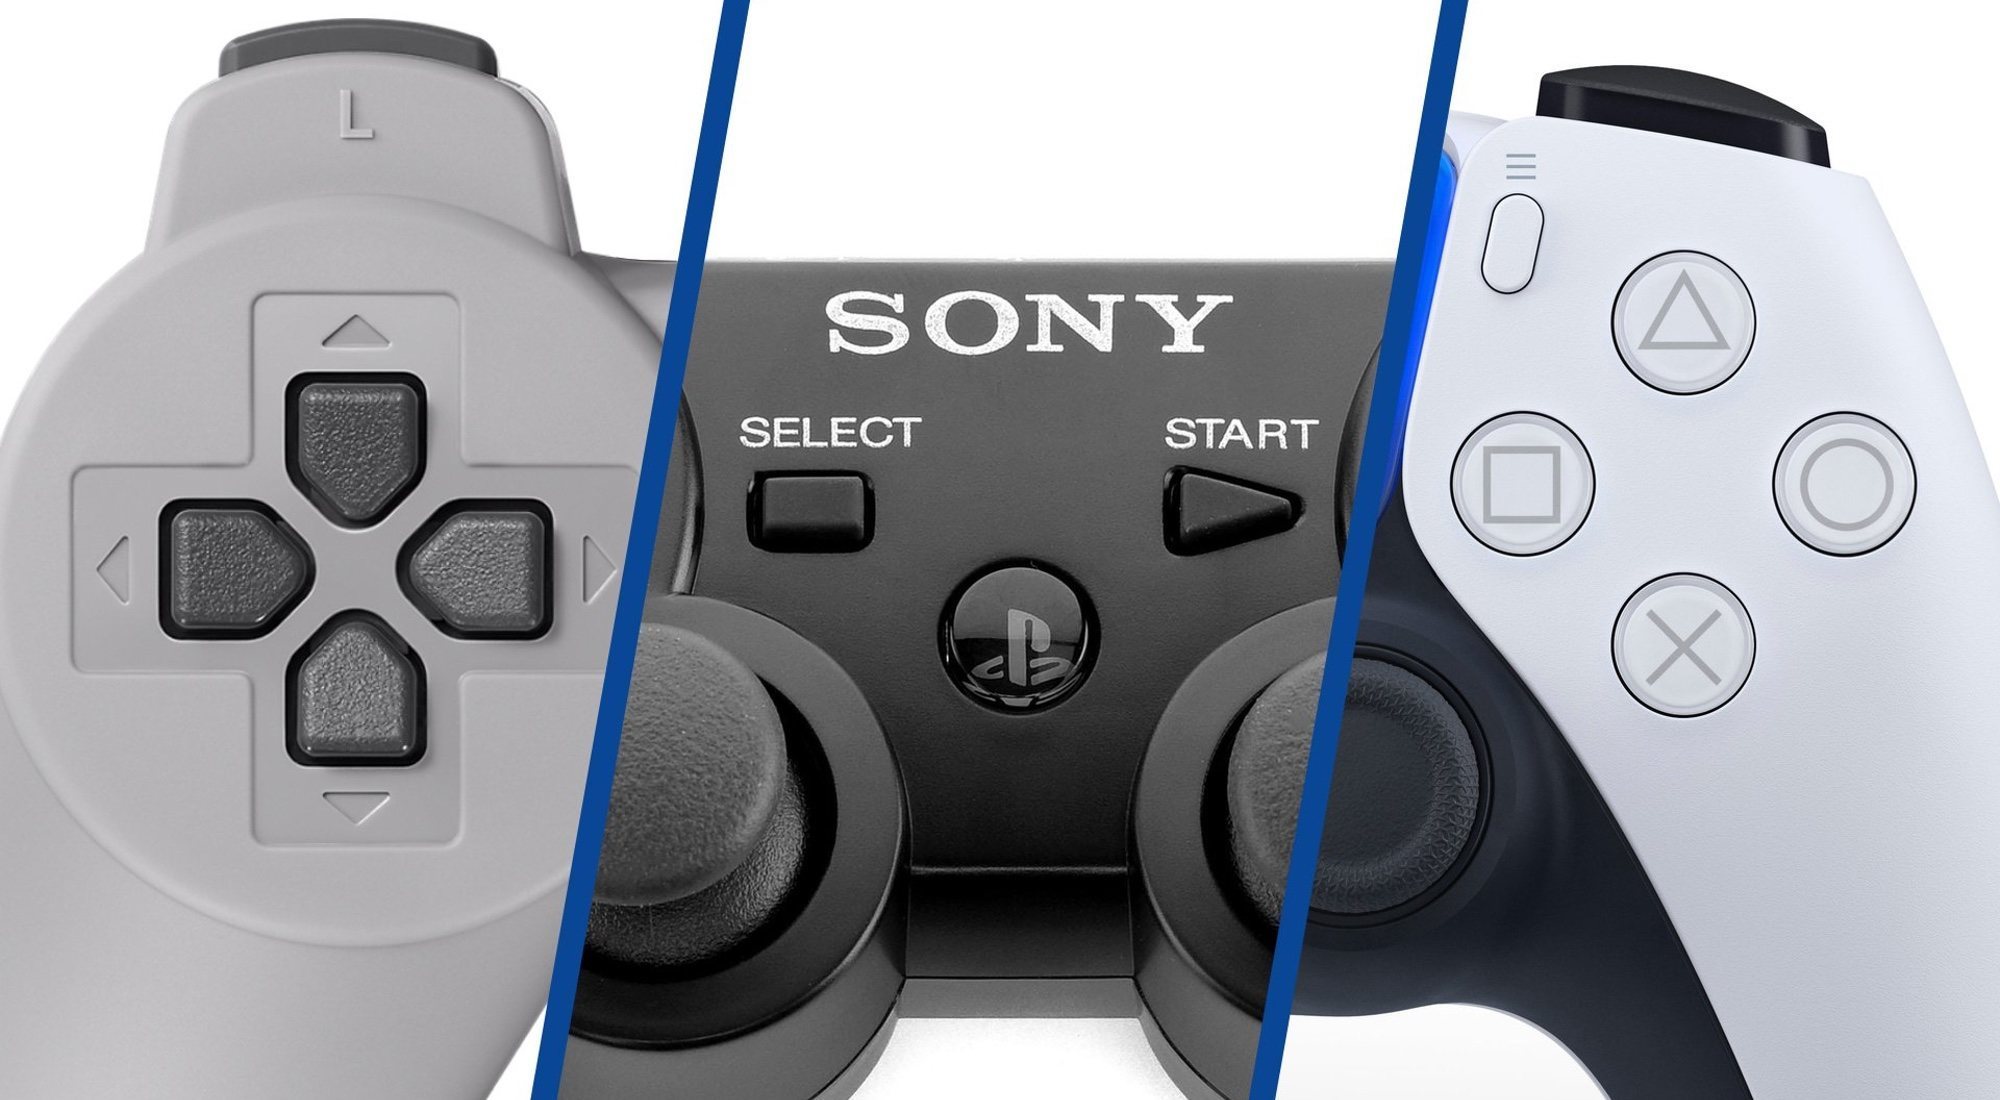 5 ps 1 2. Ps5 Dualsense Controller стики. Геймпад Sony PLAYSTATION 5 Dualsense. Ps1 ps2 ps3 ps4 Gamepad. Sony ps1 джойстик.